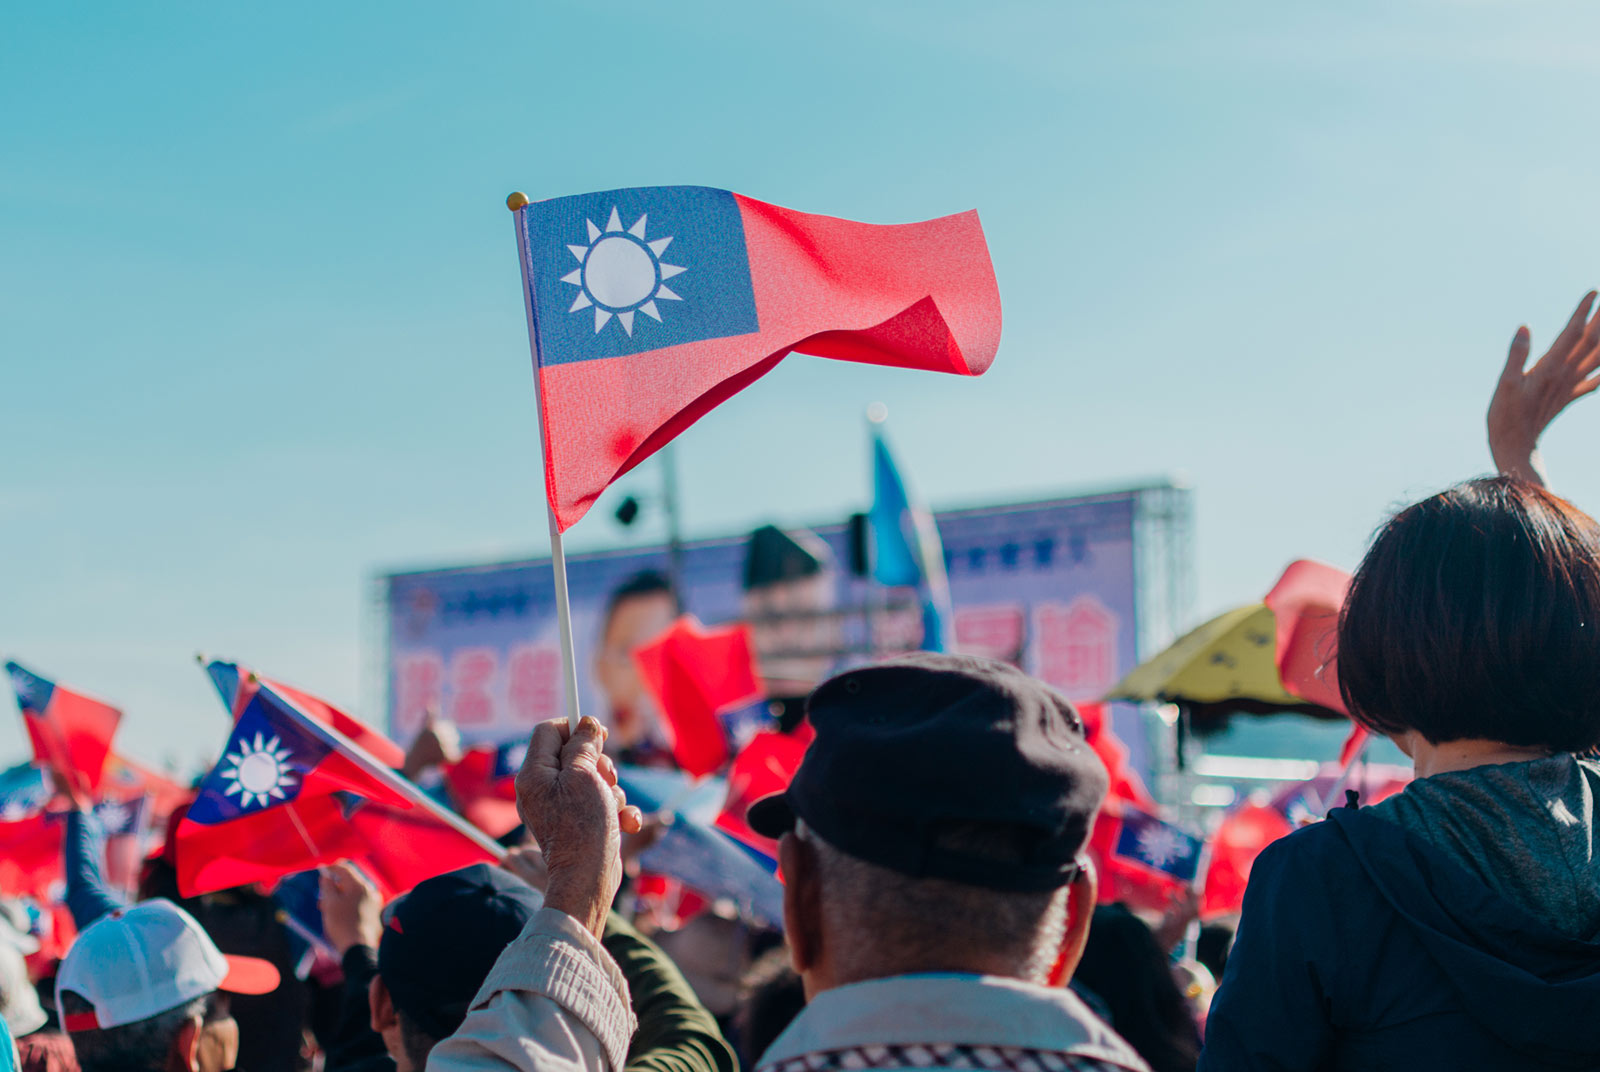 Taiwanese democracy is an international glimmer of hope